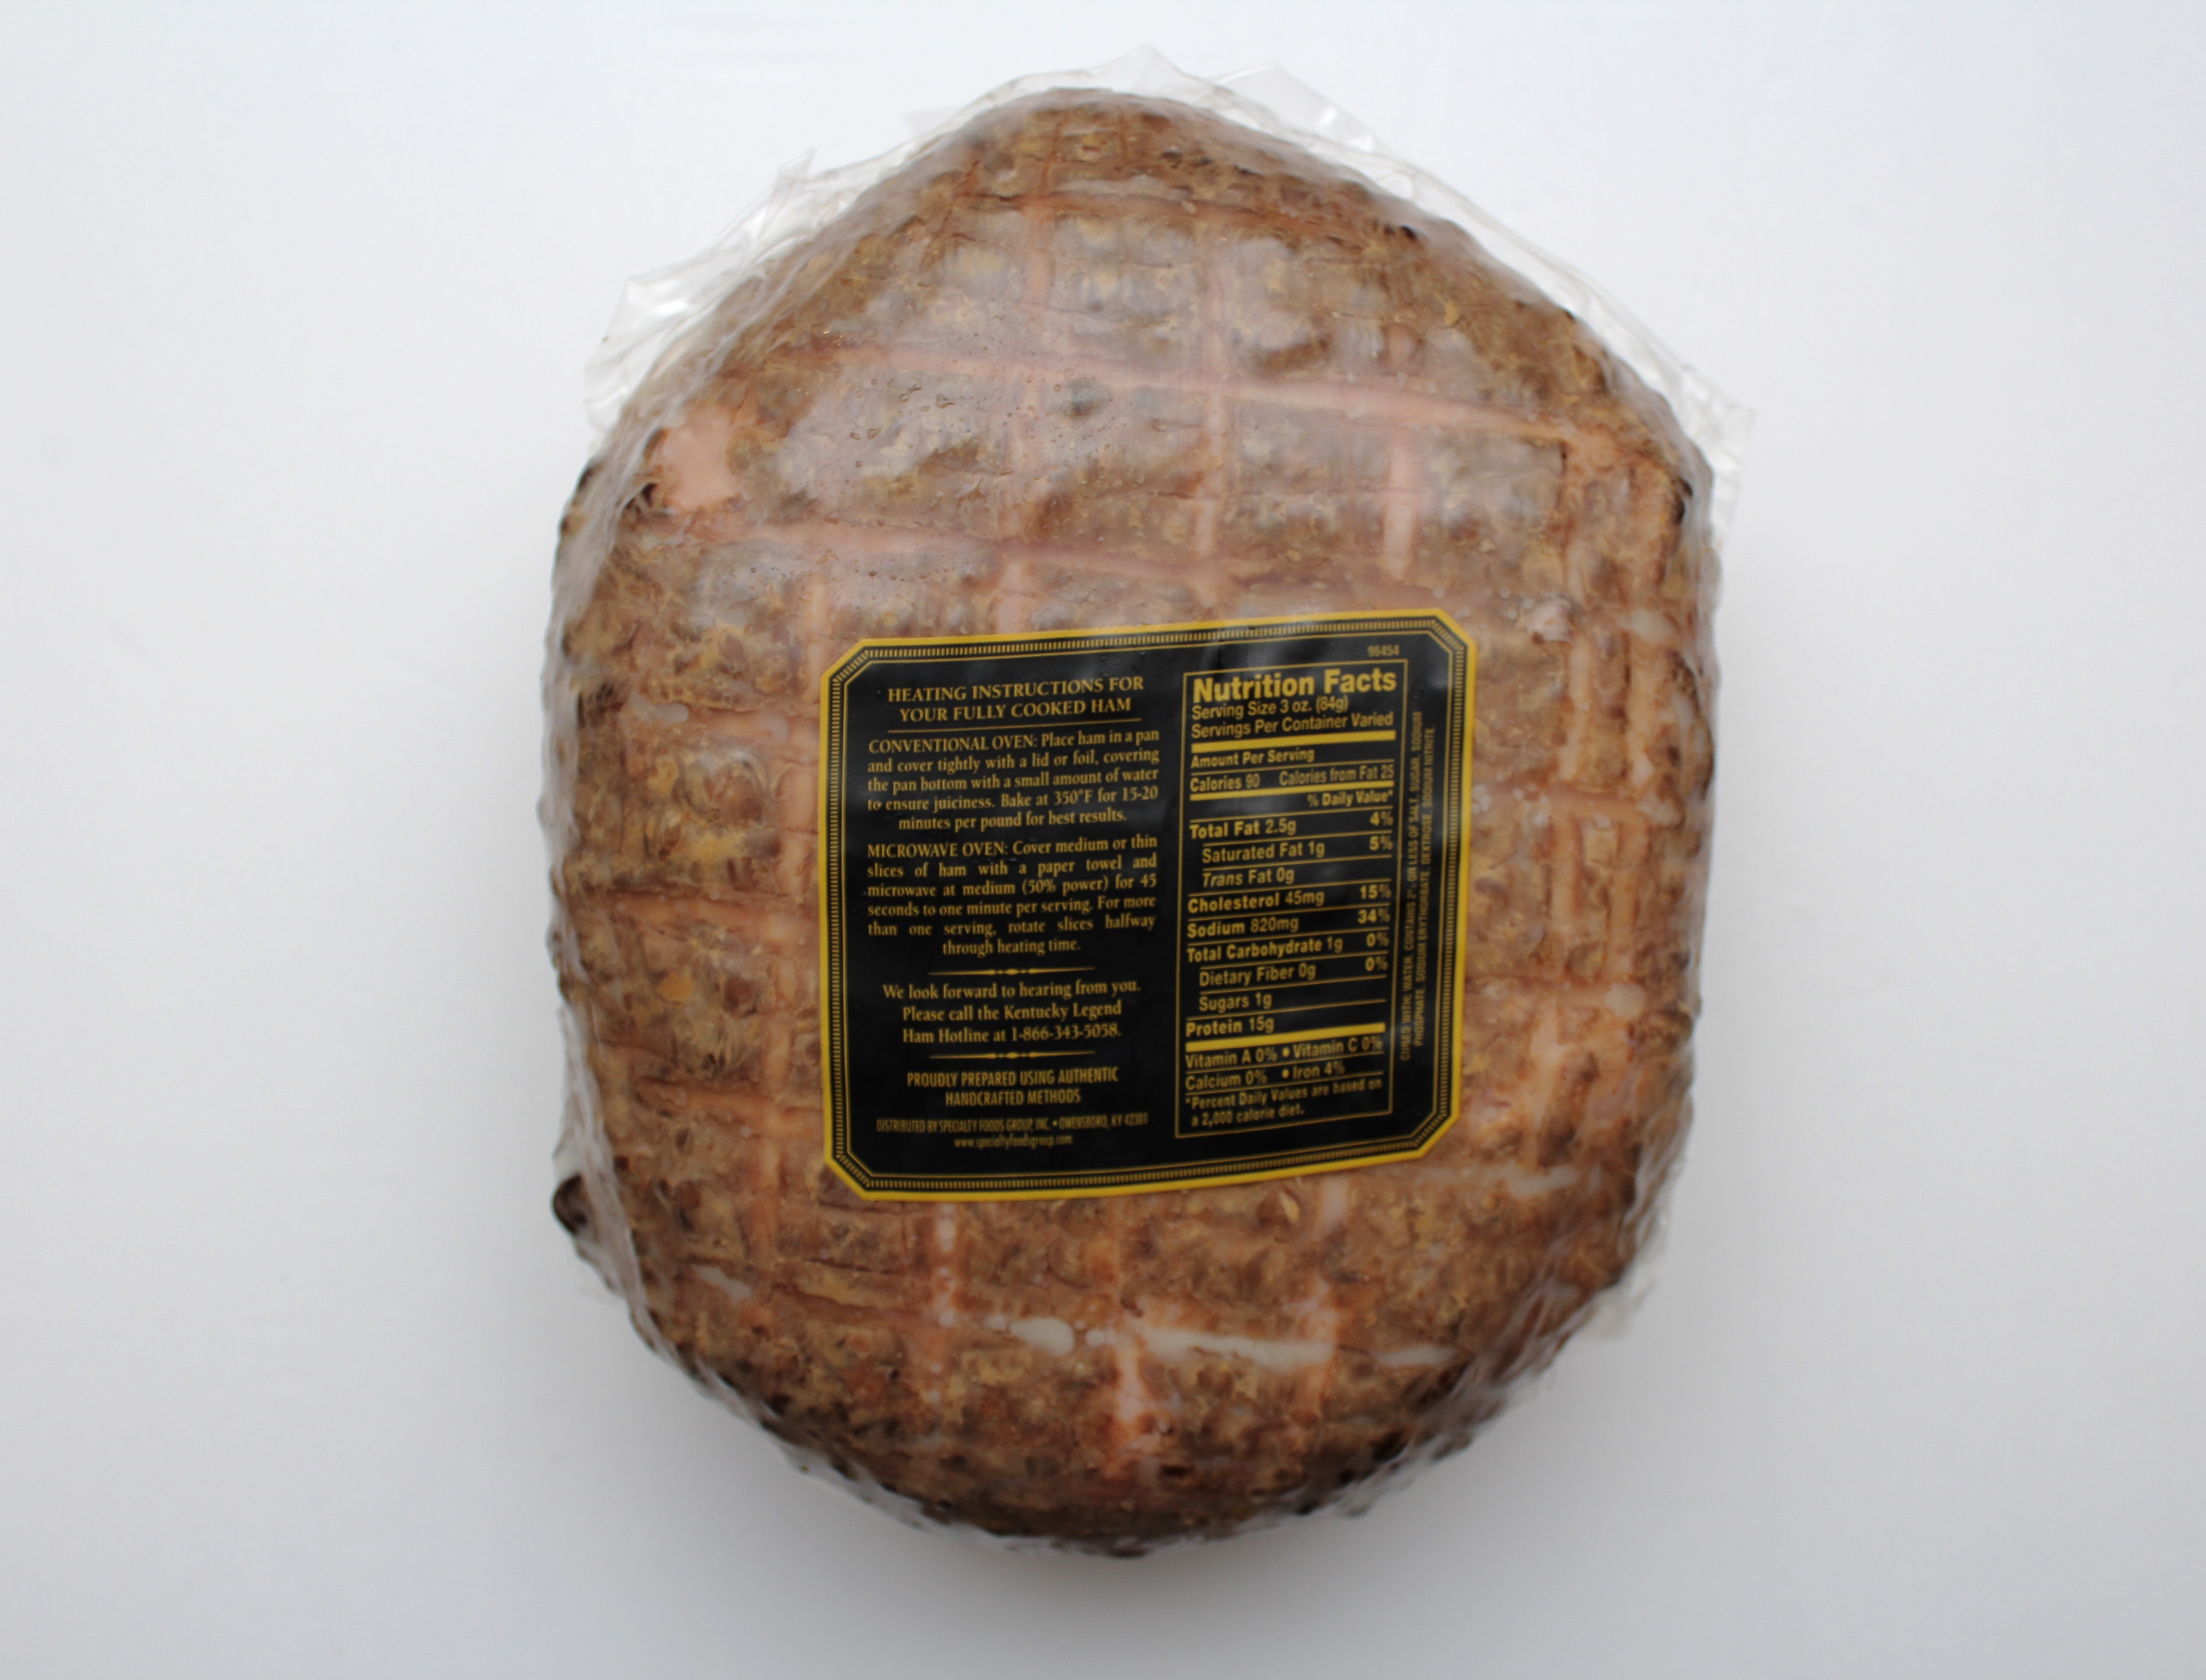 Kentucky Legend Whole Natural Juice Smoked Ham, Gluten-Free, 3 oz Serving Size, Packaged in Plastic - image 5 of 6